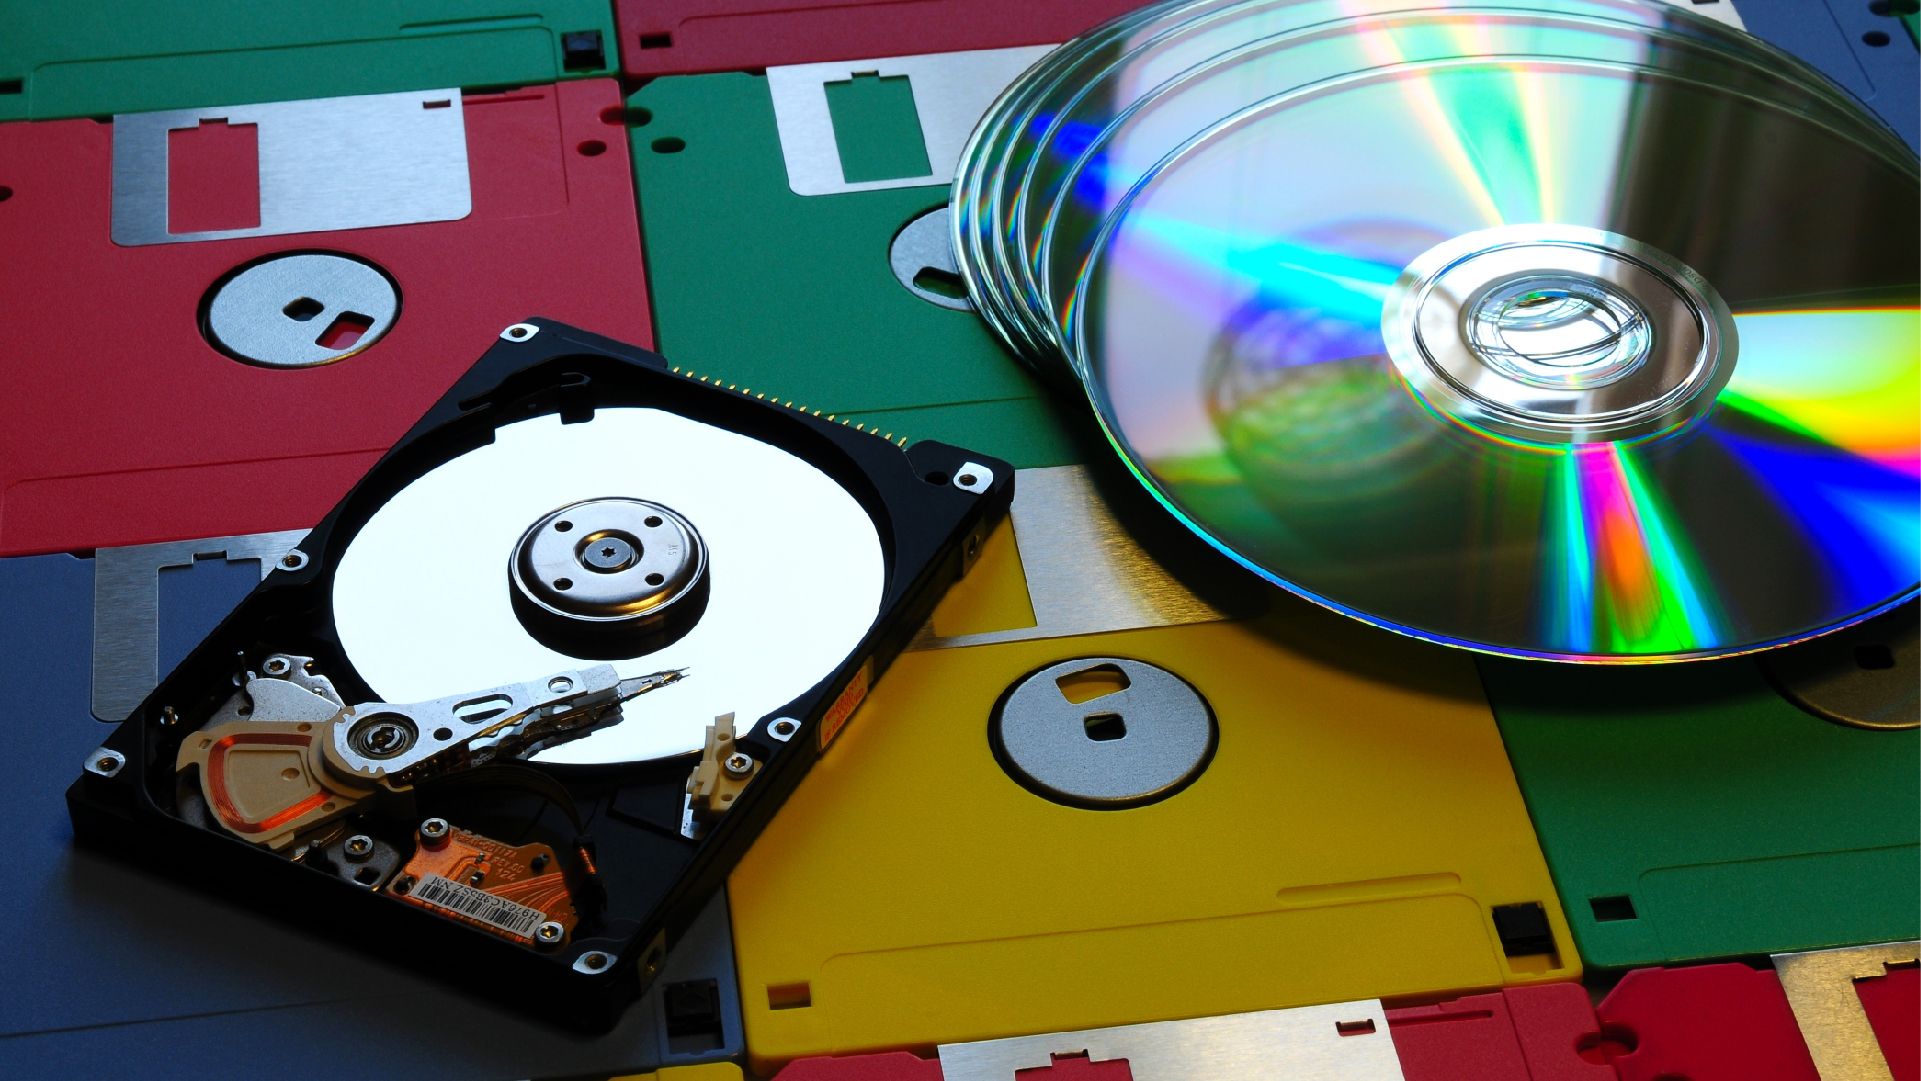 Where Is The Media Storage Device Located On Your PC